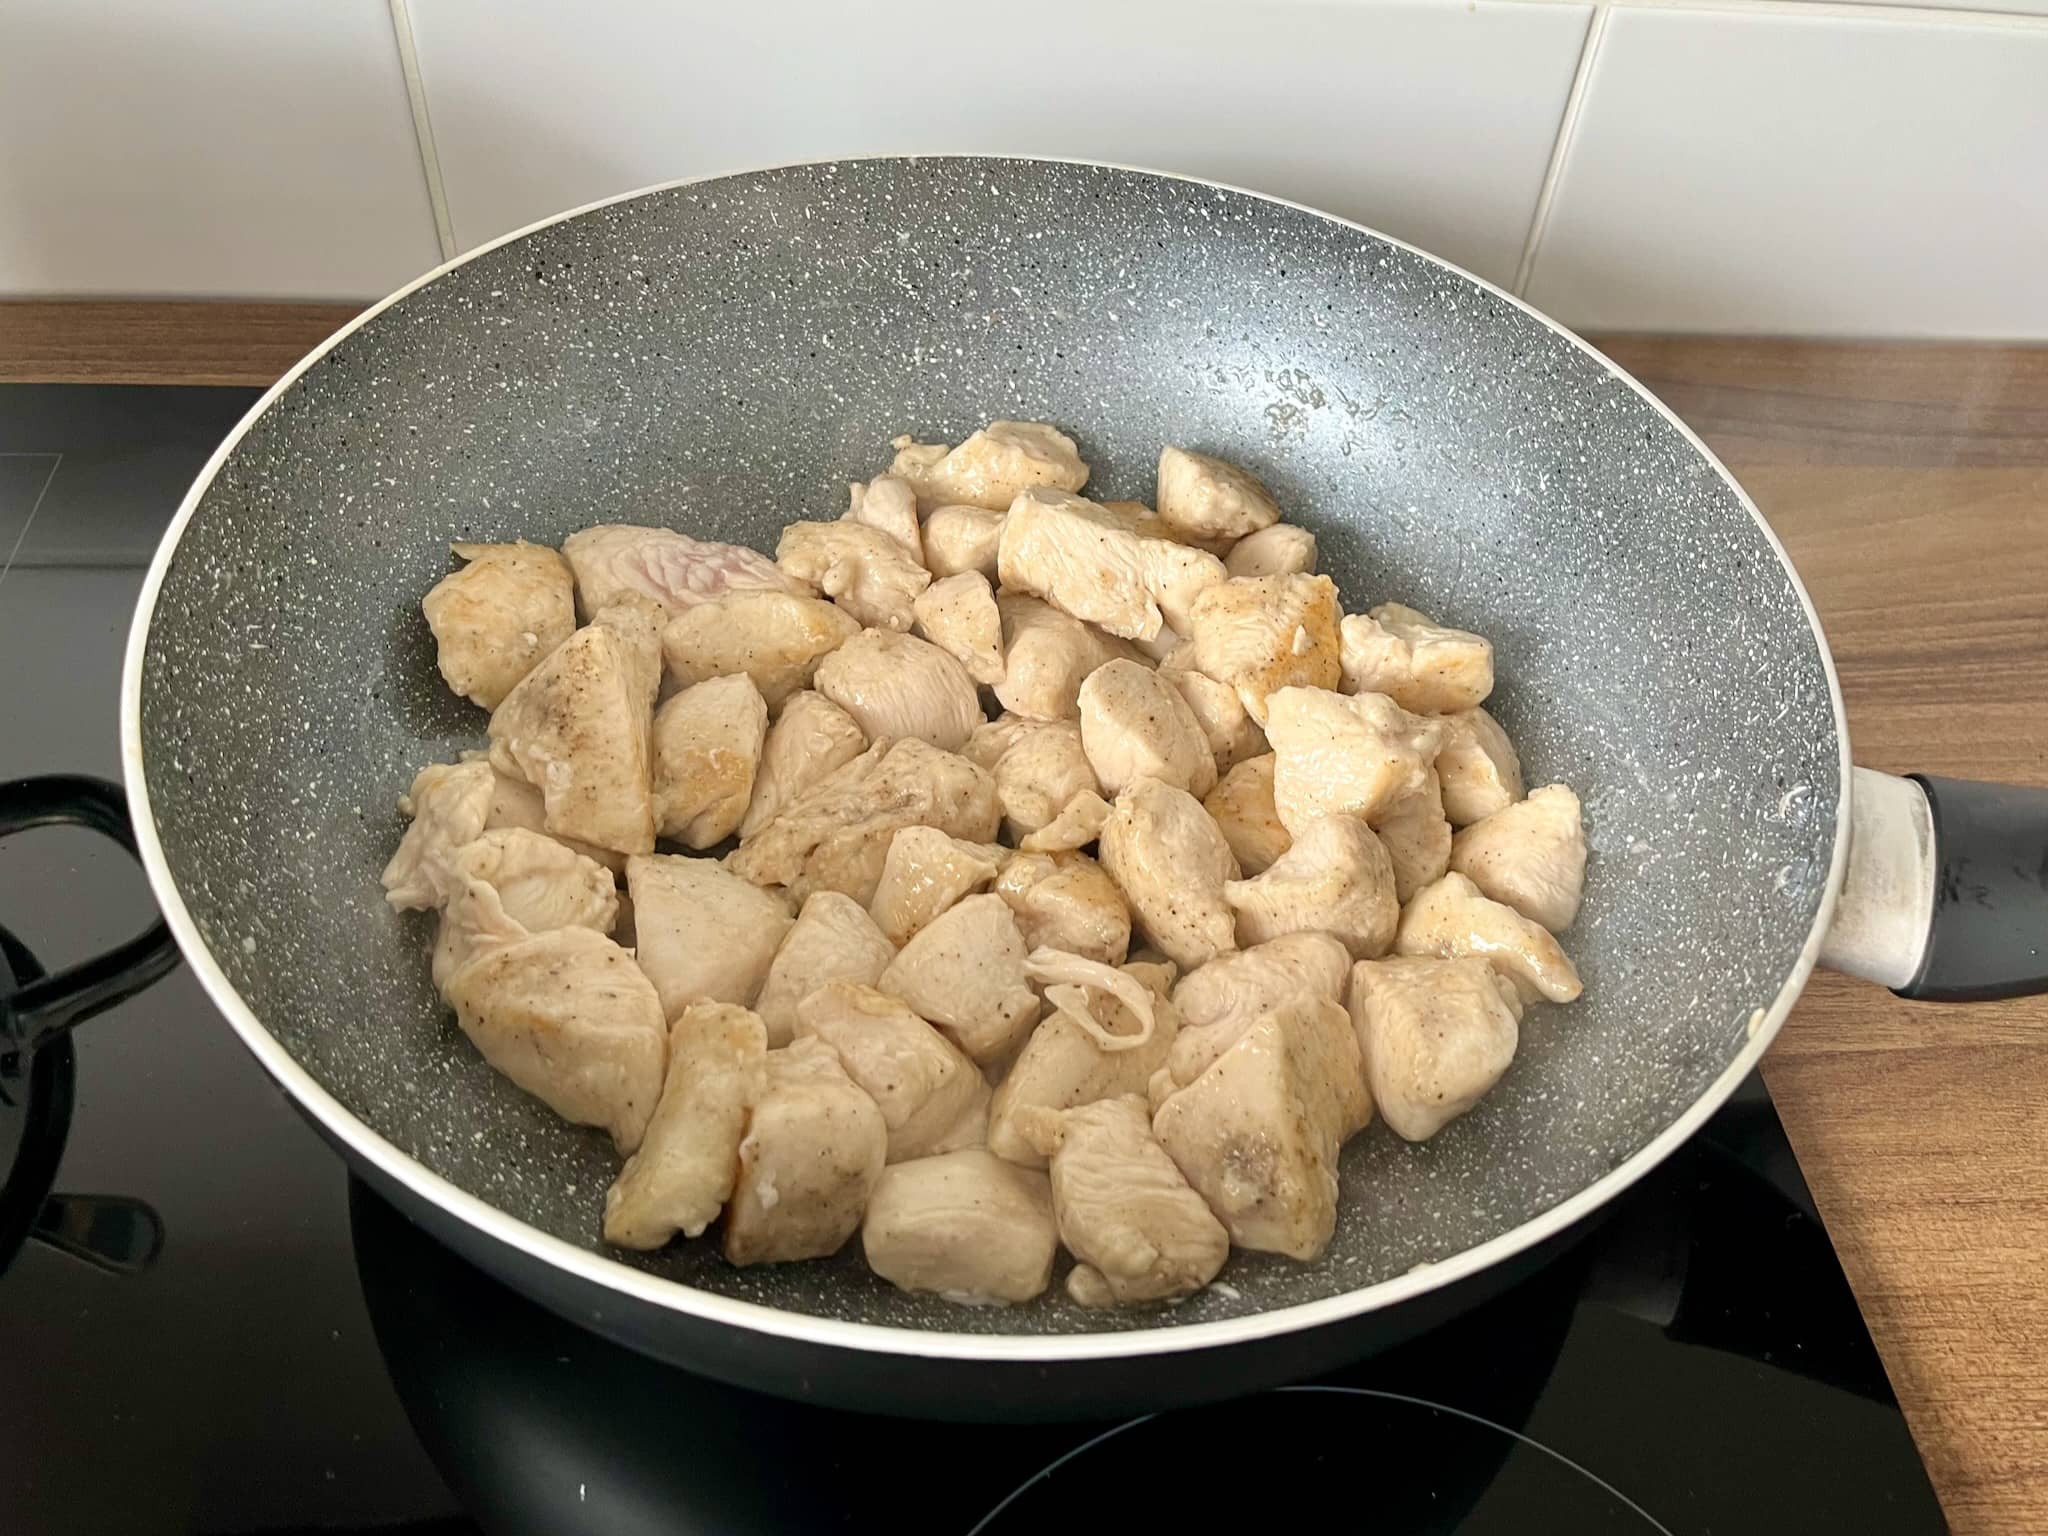 Stir-fried chicken chunks in a pan